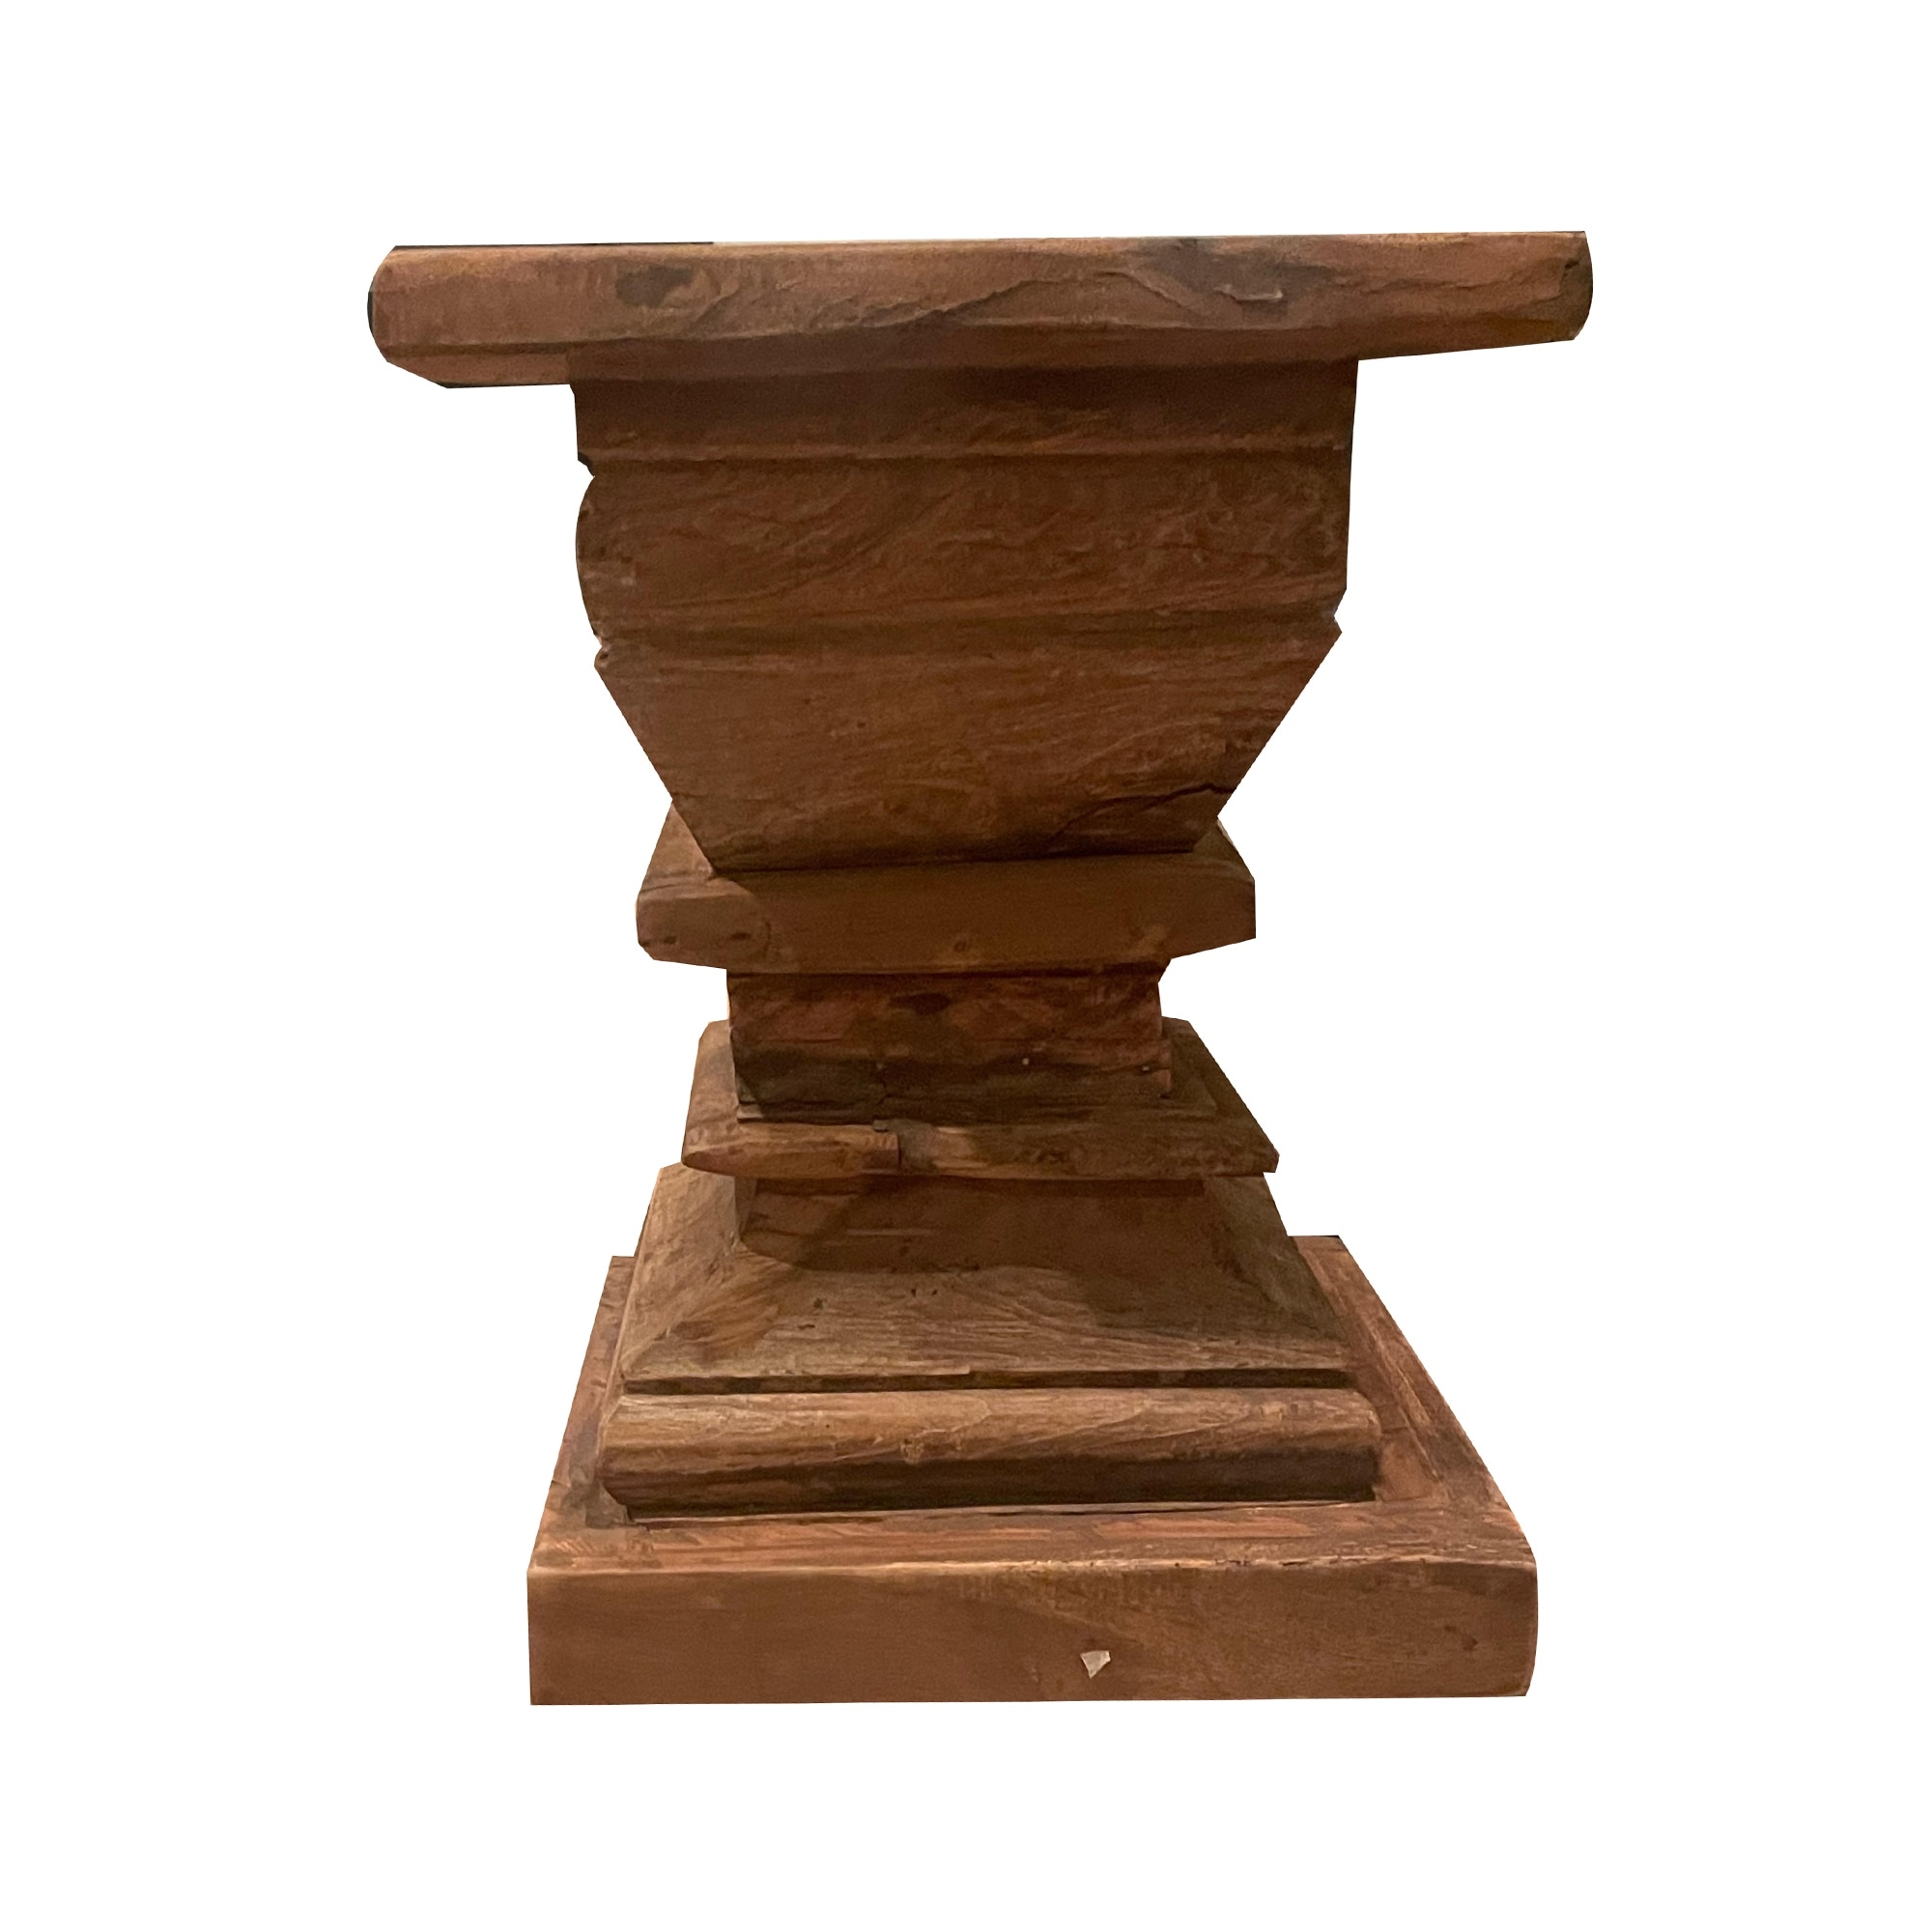 20 Inch Accent Table, Rustic Pillar Pedestal with Scrolled Carvings, Brown